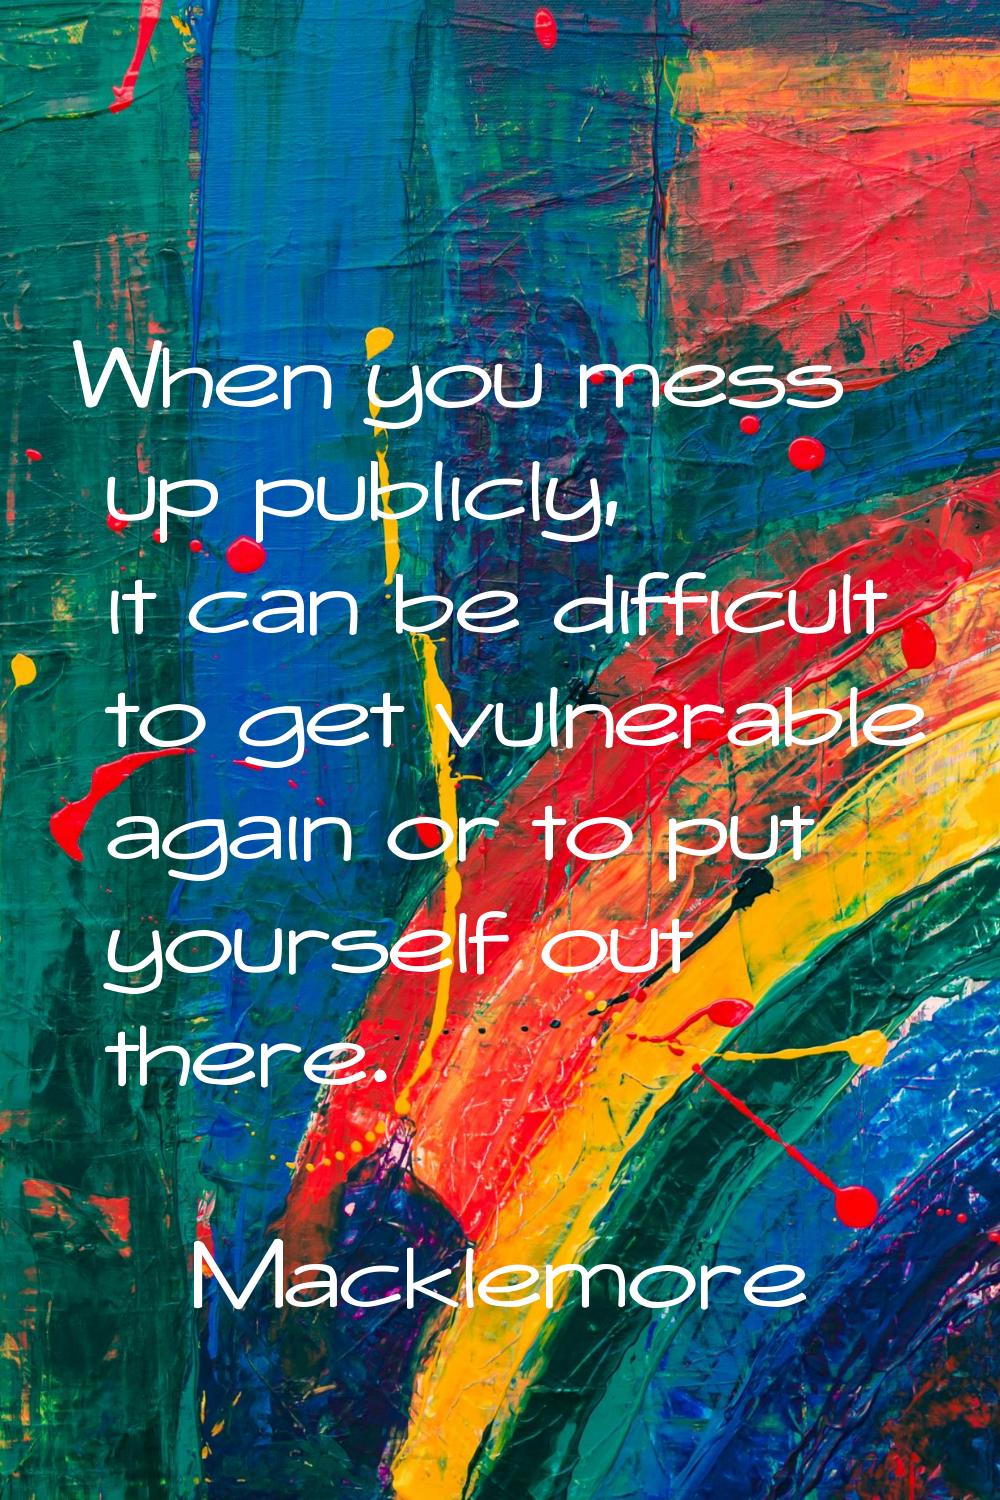 When you mess up publicly, it can be difficult to get vulnerable again or to put yourself out there